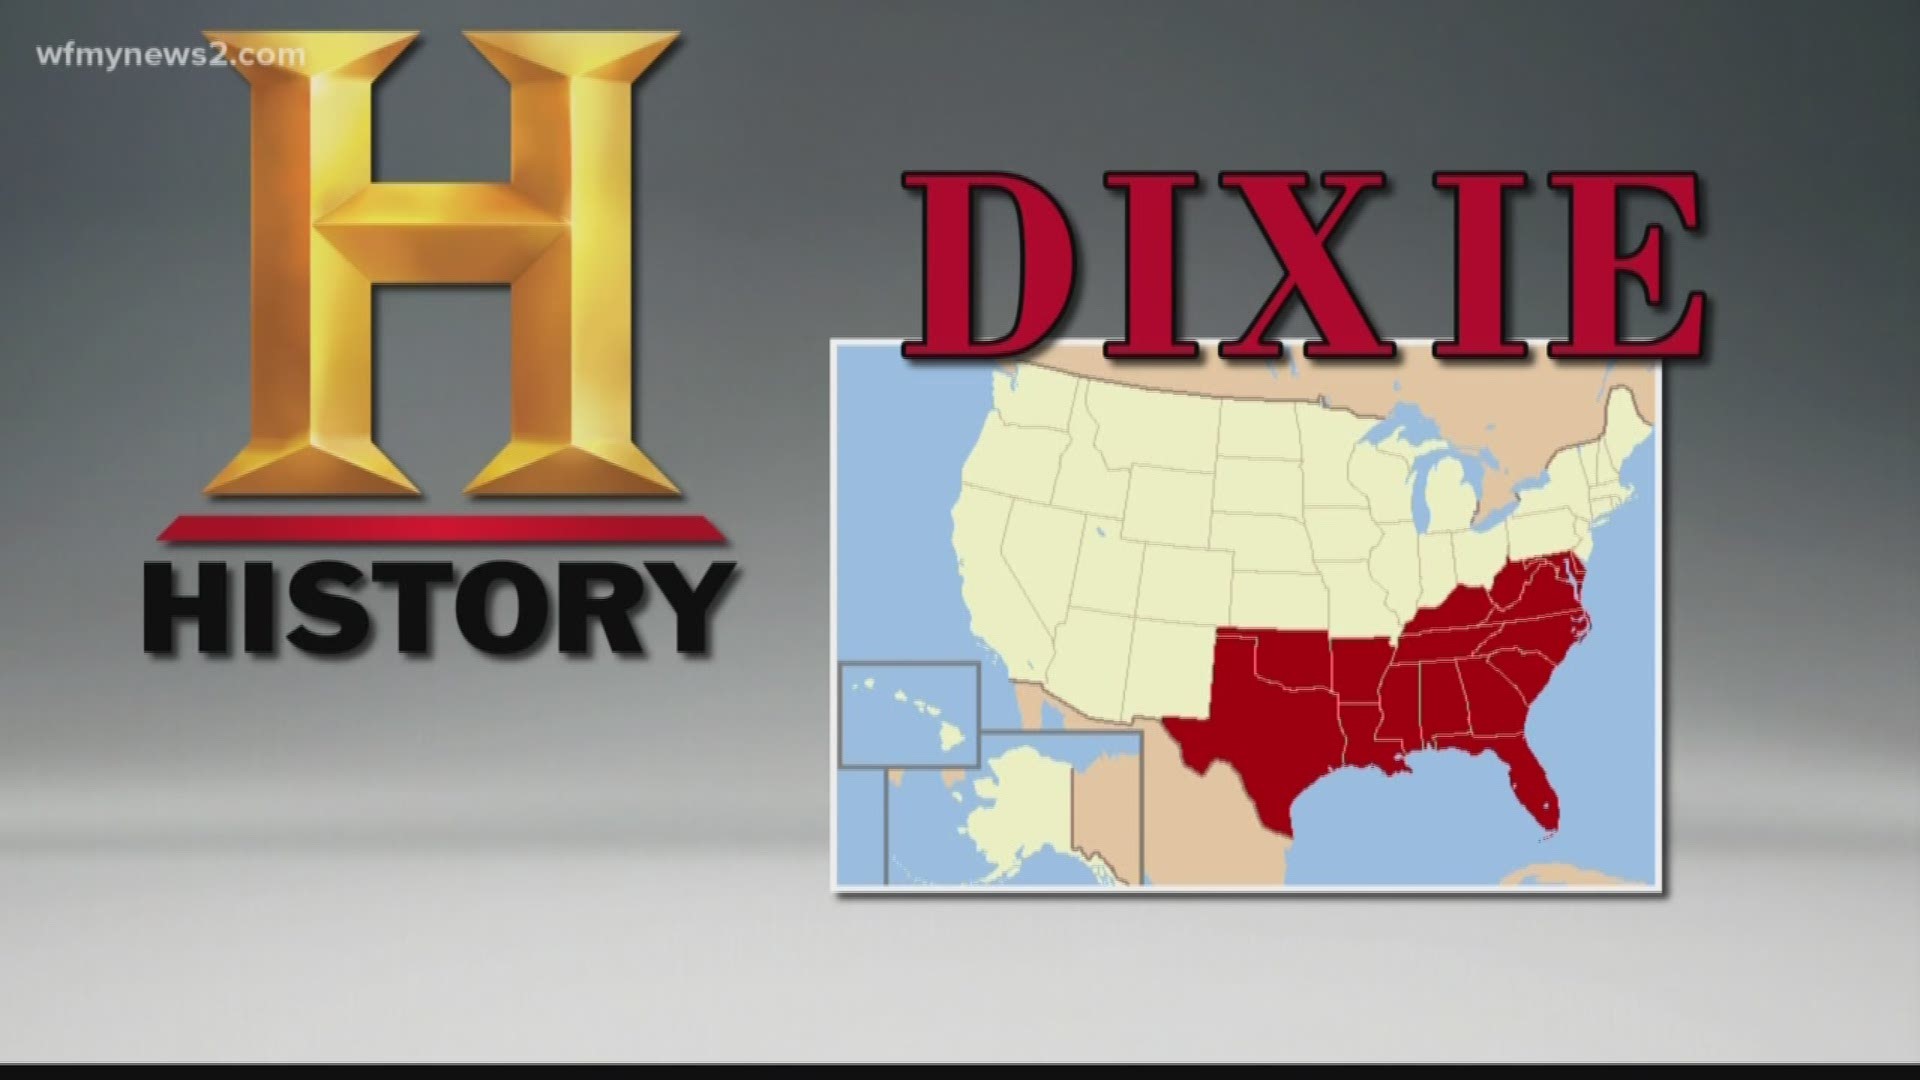 Here's the history and possible origin(s) of the word “Dixie”